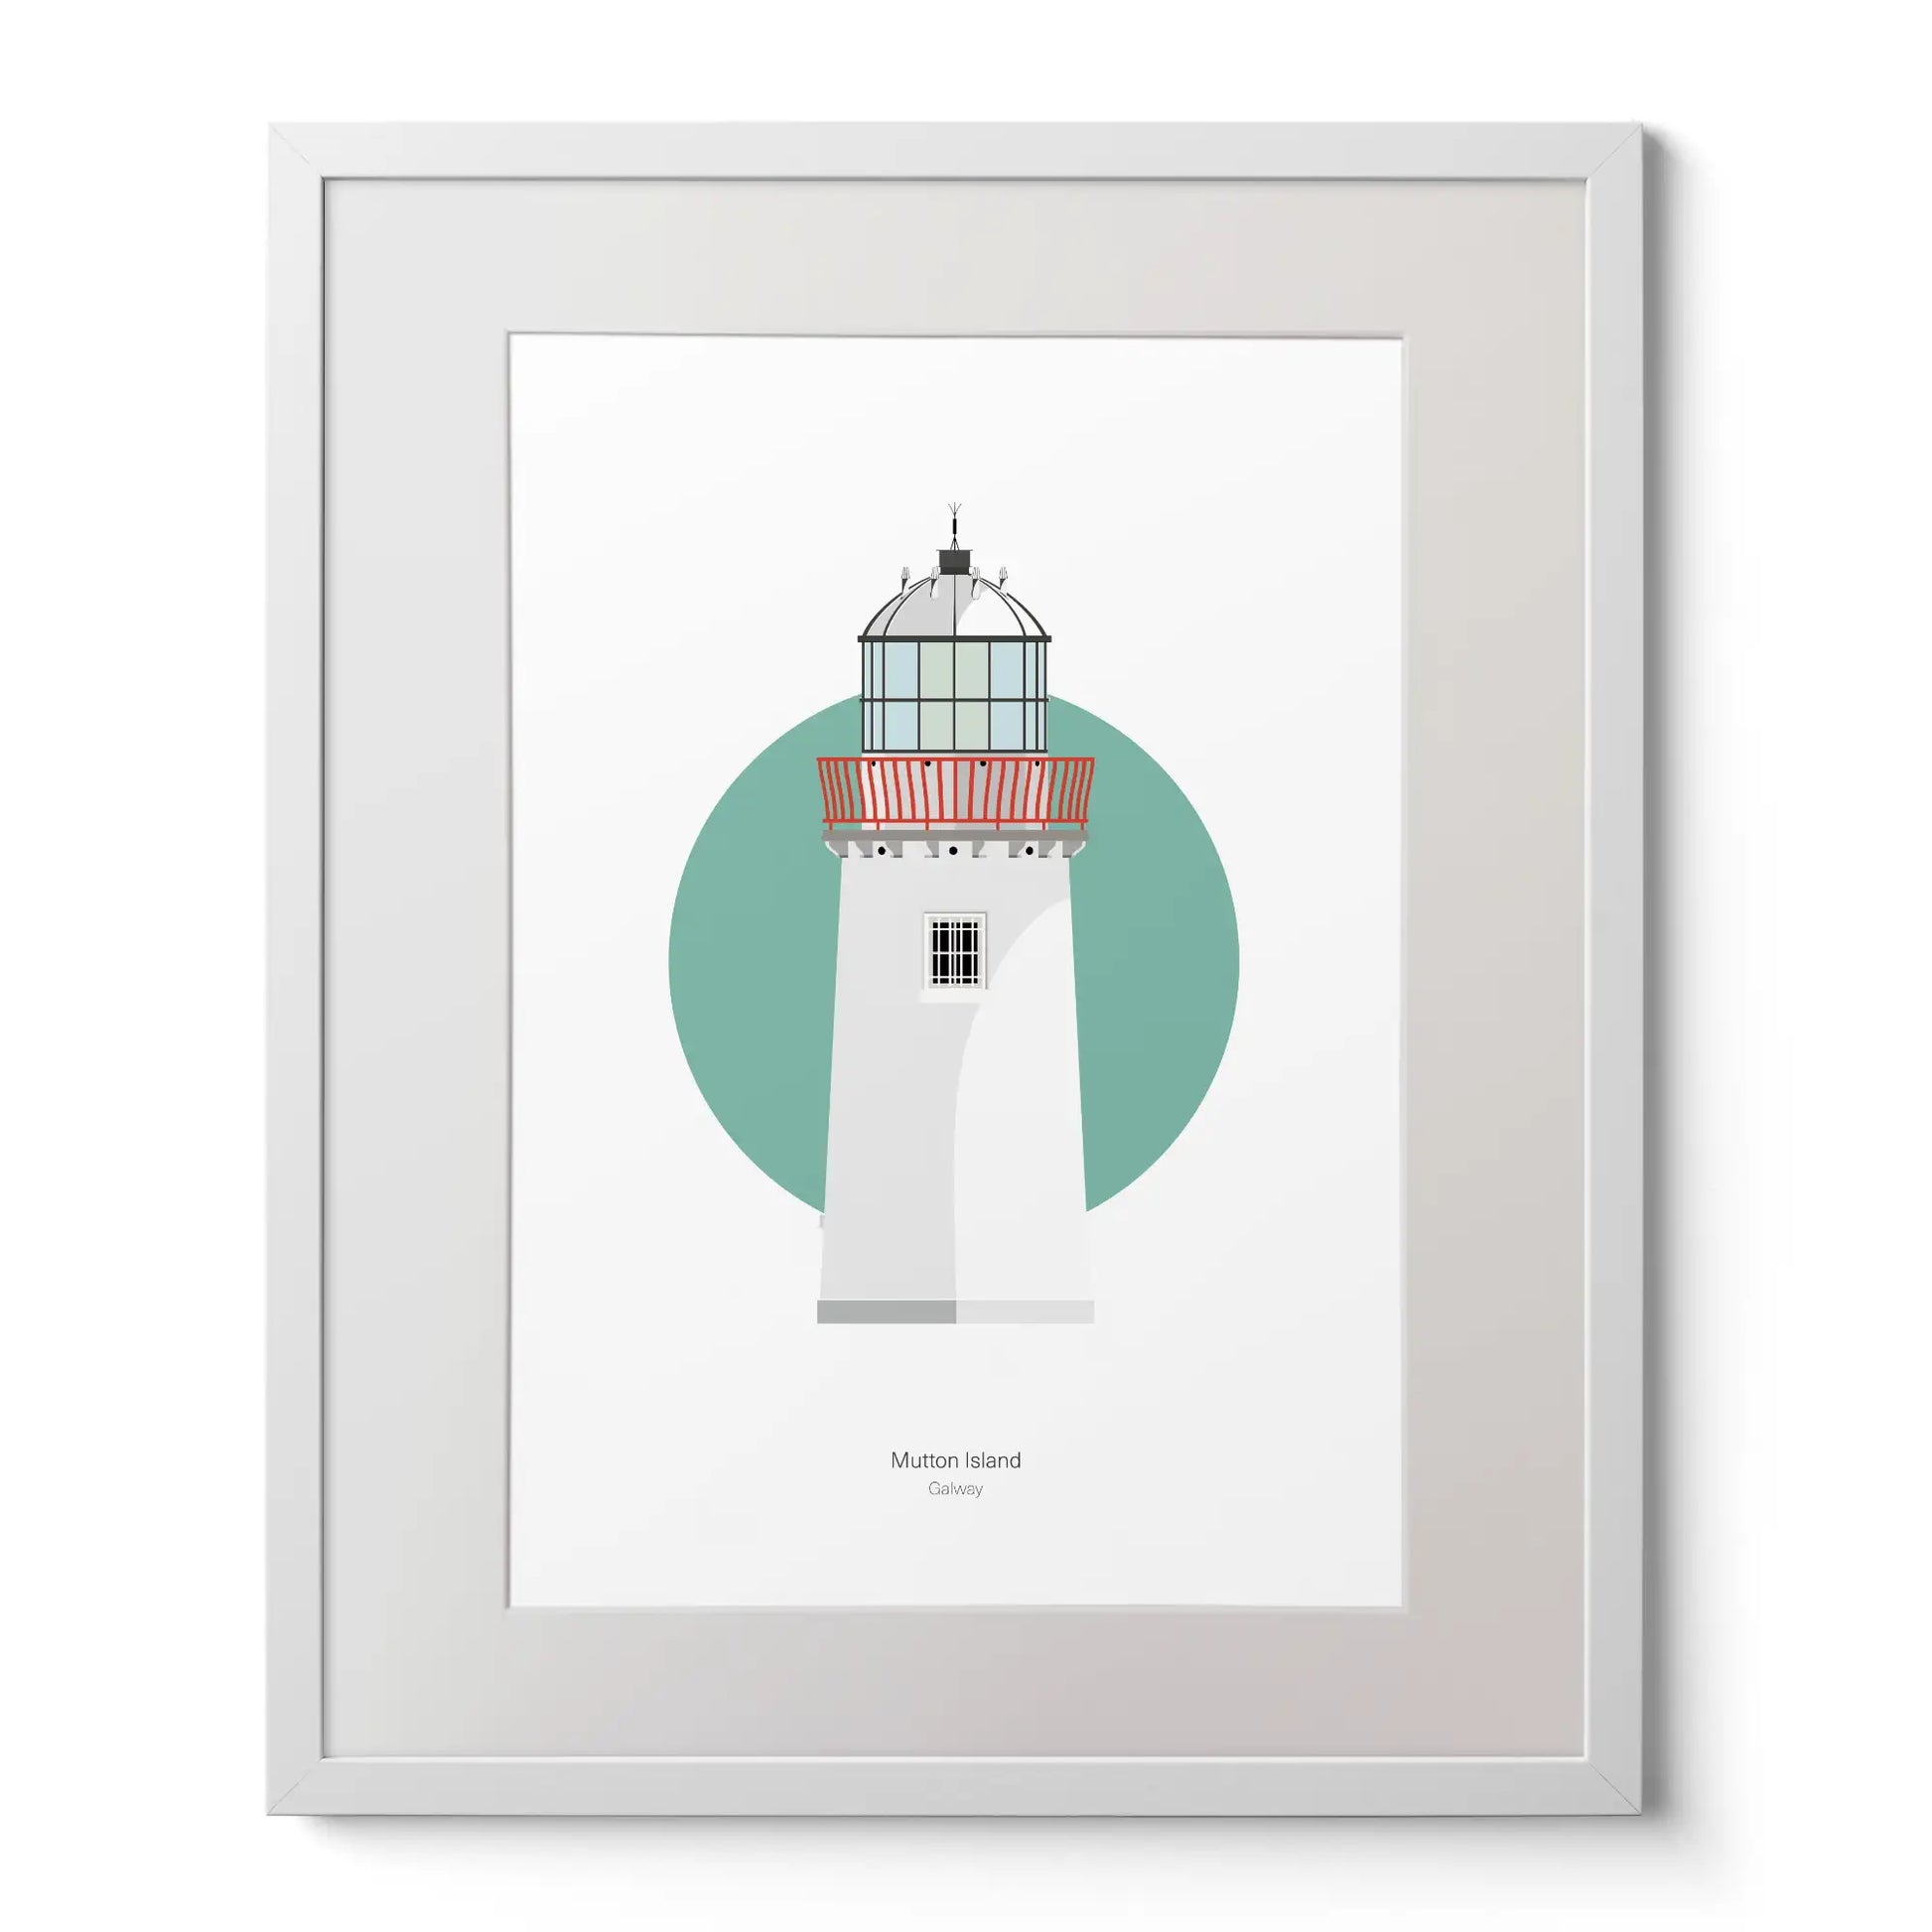 Illustration of Mutton Island lighthouse on a white background inside light blue square,  in a white frame measuring 40x50cm.